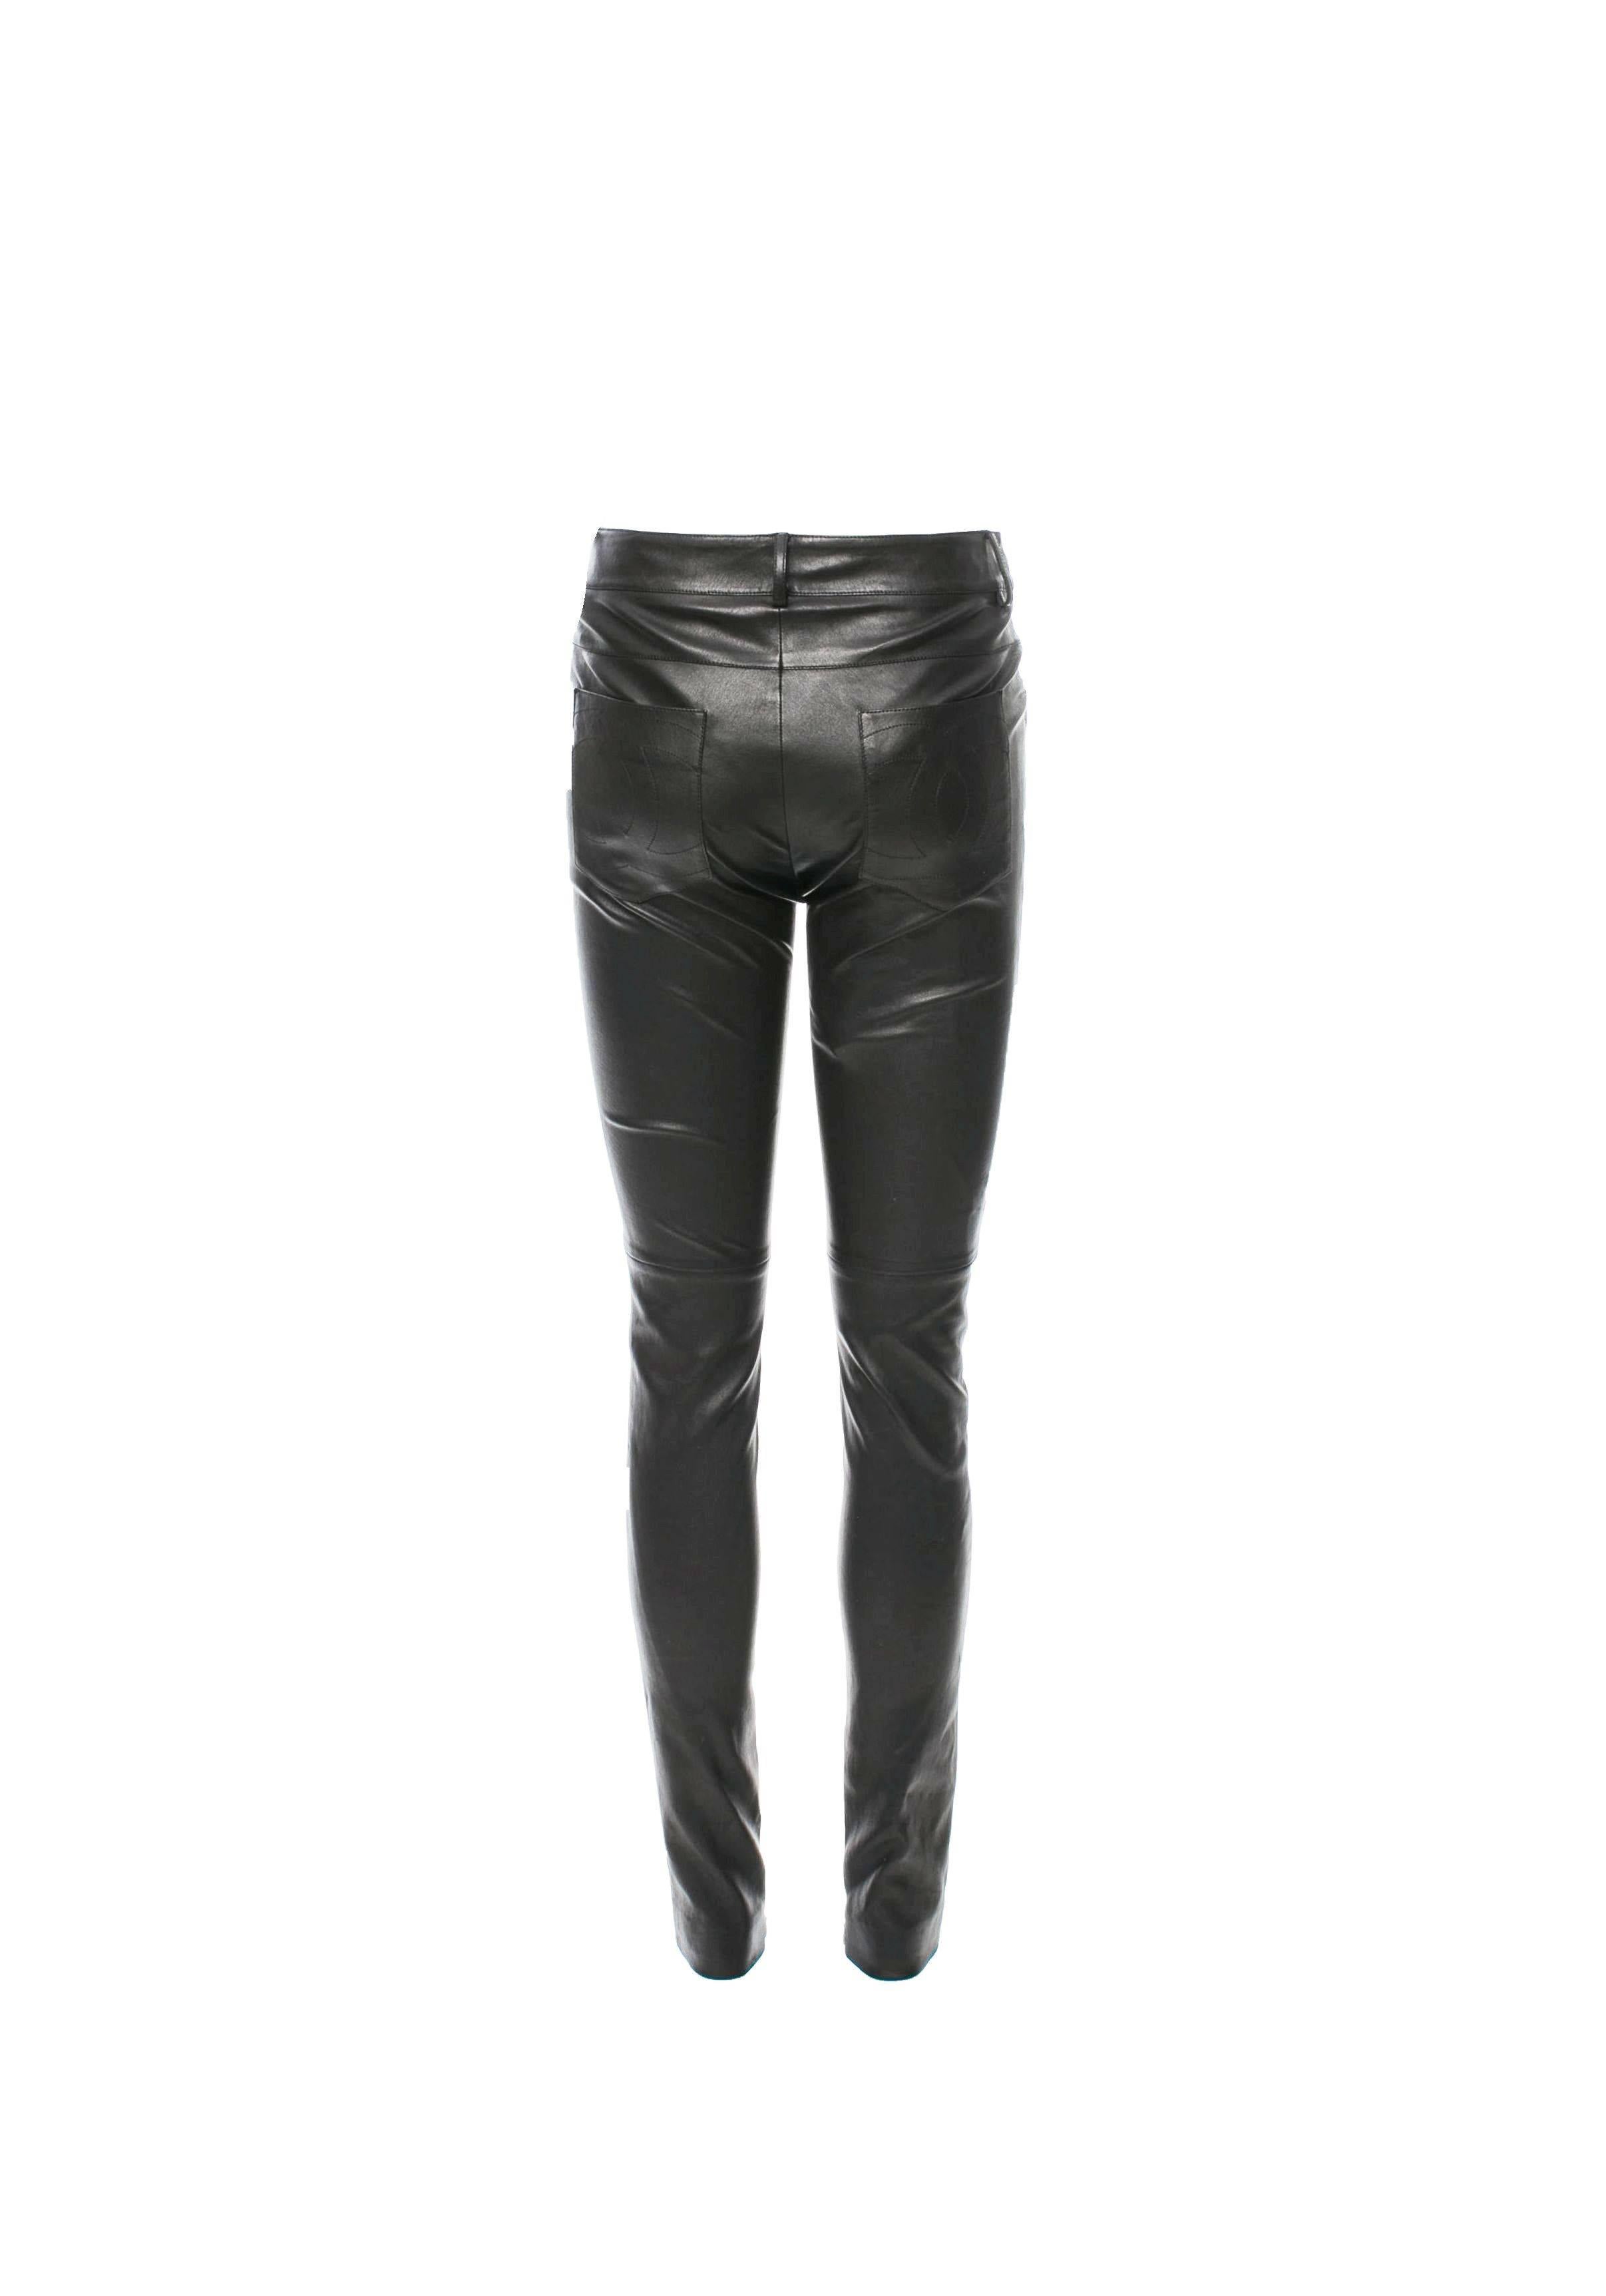 Stunning Chanel leather pants
Feels like a second skin due to the fantstic leather cotton stretch mix
Designed by Karl Lagerfeld
Modern skinny style
Closes in front with zip and 